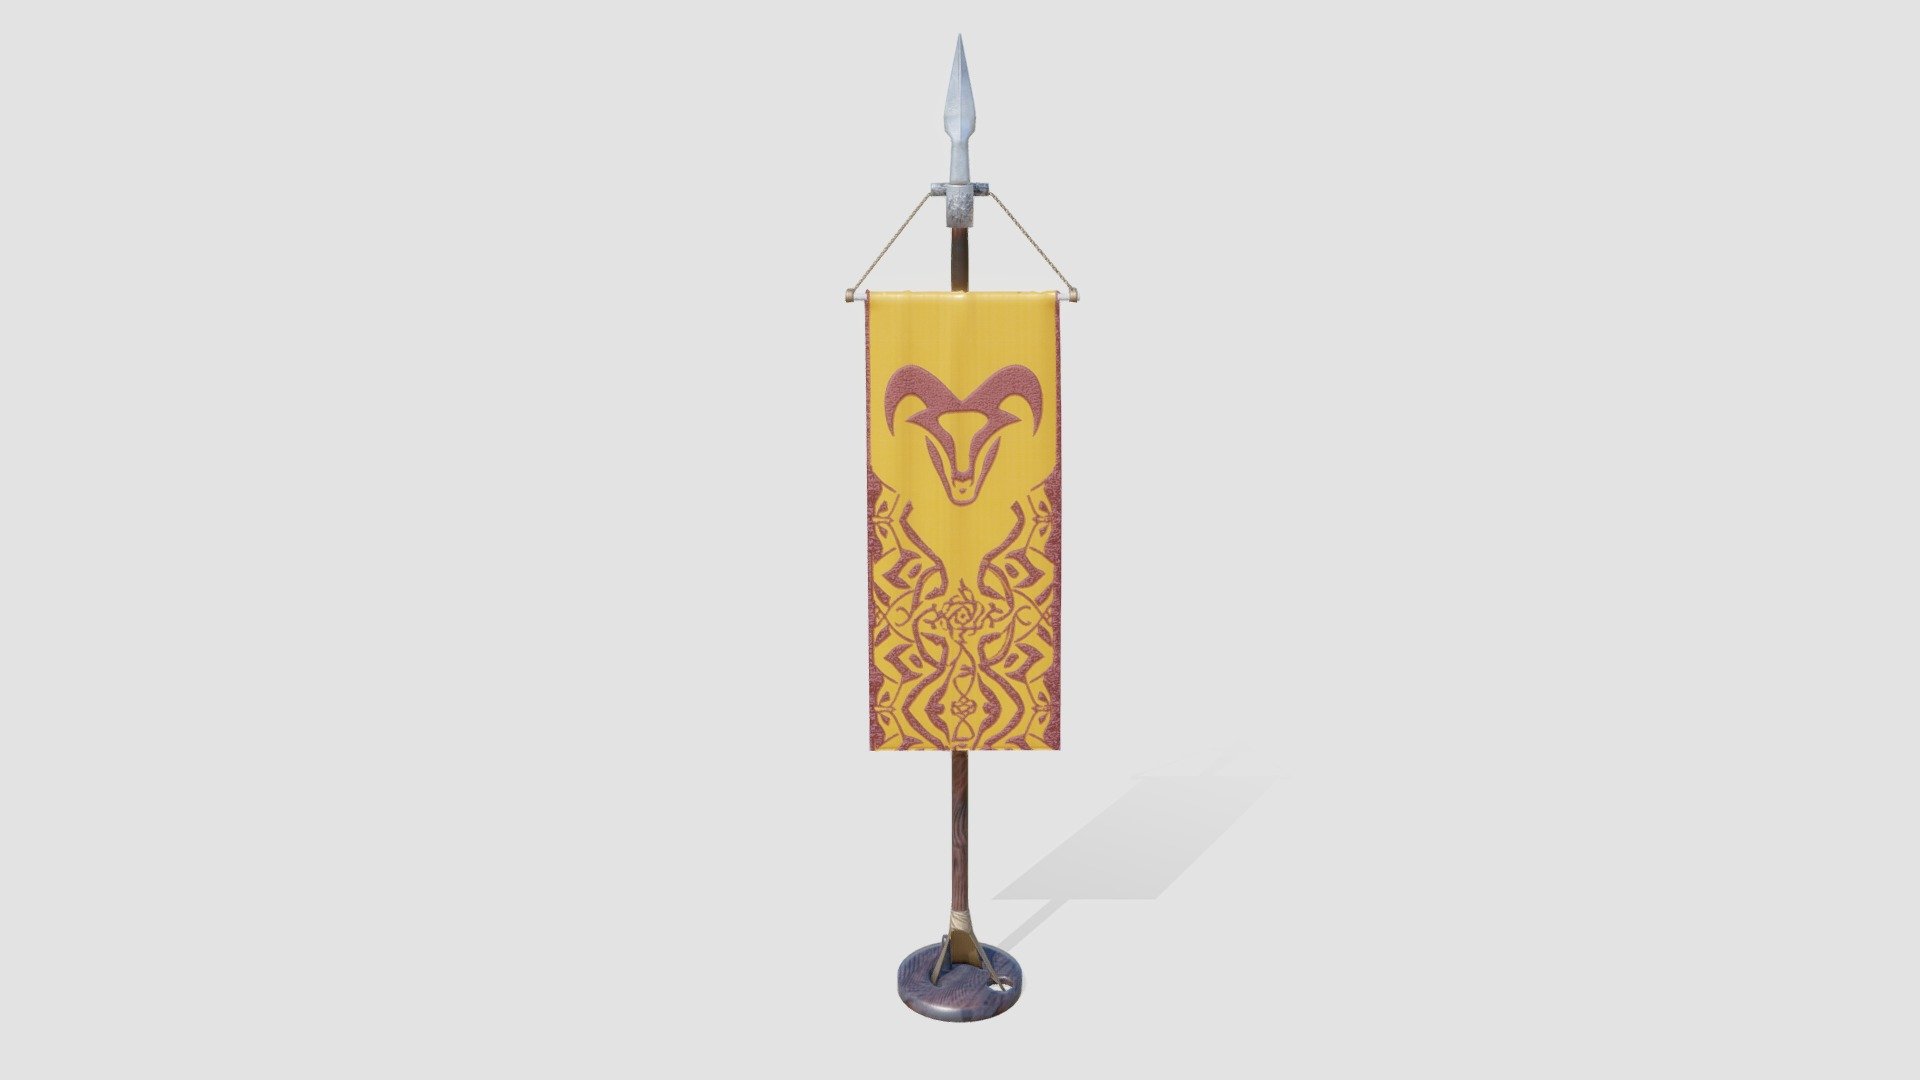 Check out my website for more products and better deals! 👉 SM5 by Heledahn 👈


This is a digital 3D model of a medieval fantasy castle banner. The design is an abstract icon of a goat's head. The fabric is silk, and the sigil is sewn into the fabric with red thread. 

The banner hangs from a beautiful ornamental spear, that sits vertical on a wood stand.

Textures come in 4K for perfect closeups.

This product will achieve realistic results in your rendering projects, being greatly suited for close-ups due to their high quality topology and PBR shading 3d model